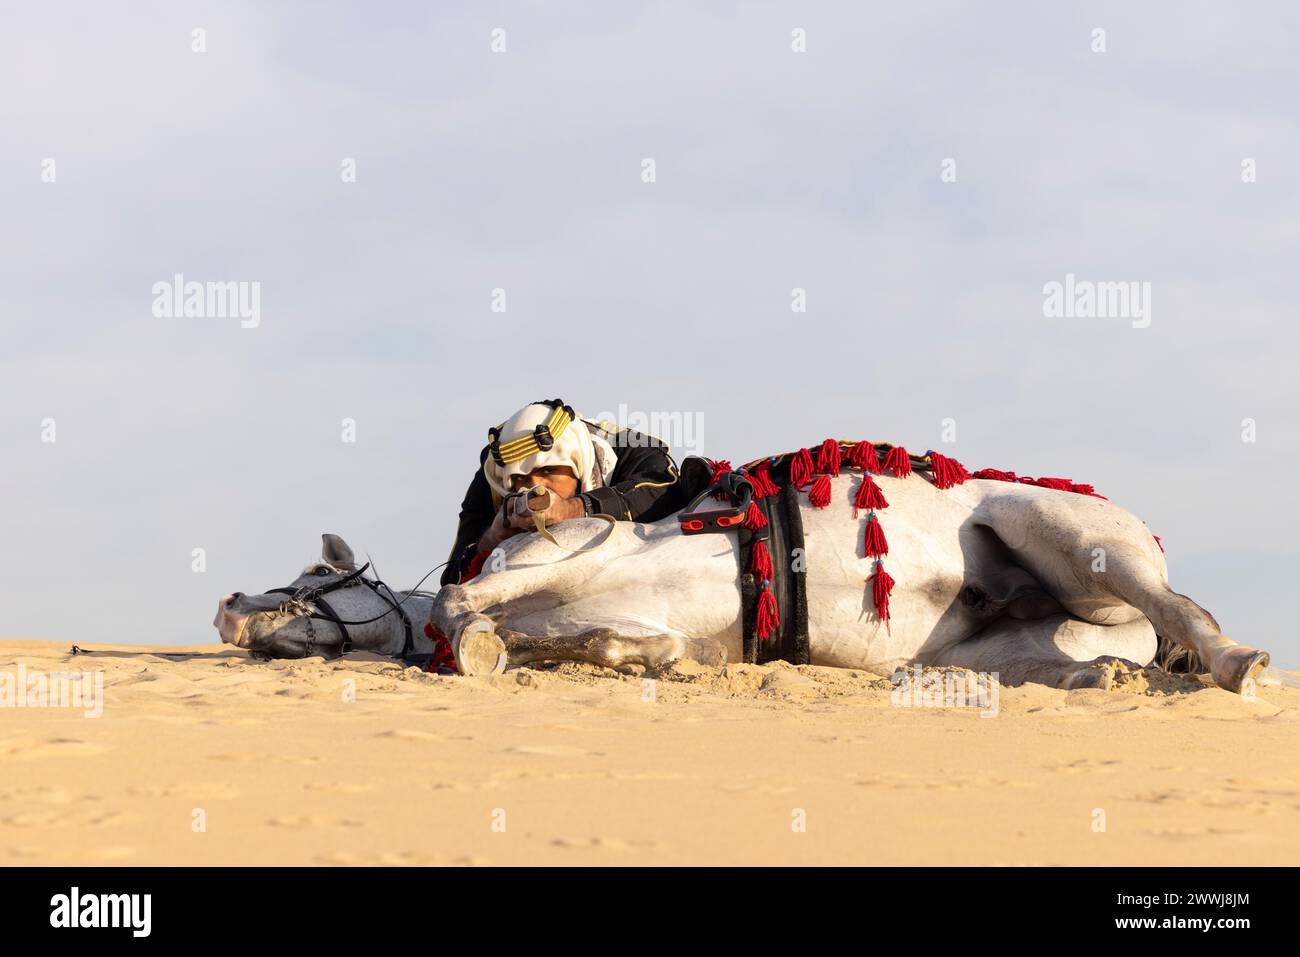 Saudi man in traditional clothing with his white stallion, aiming a hunting rifle from behind his horse Stock Photo